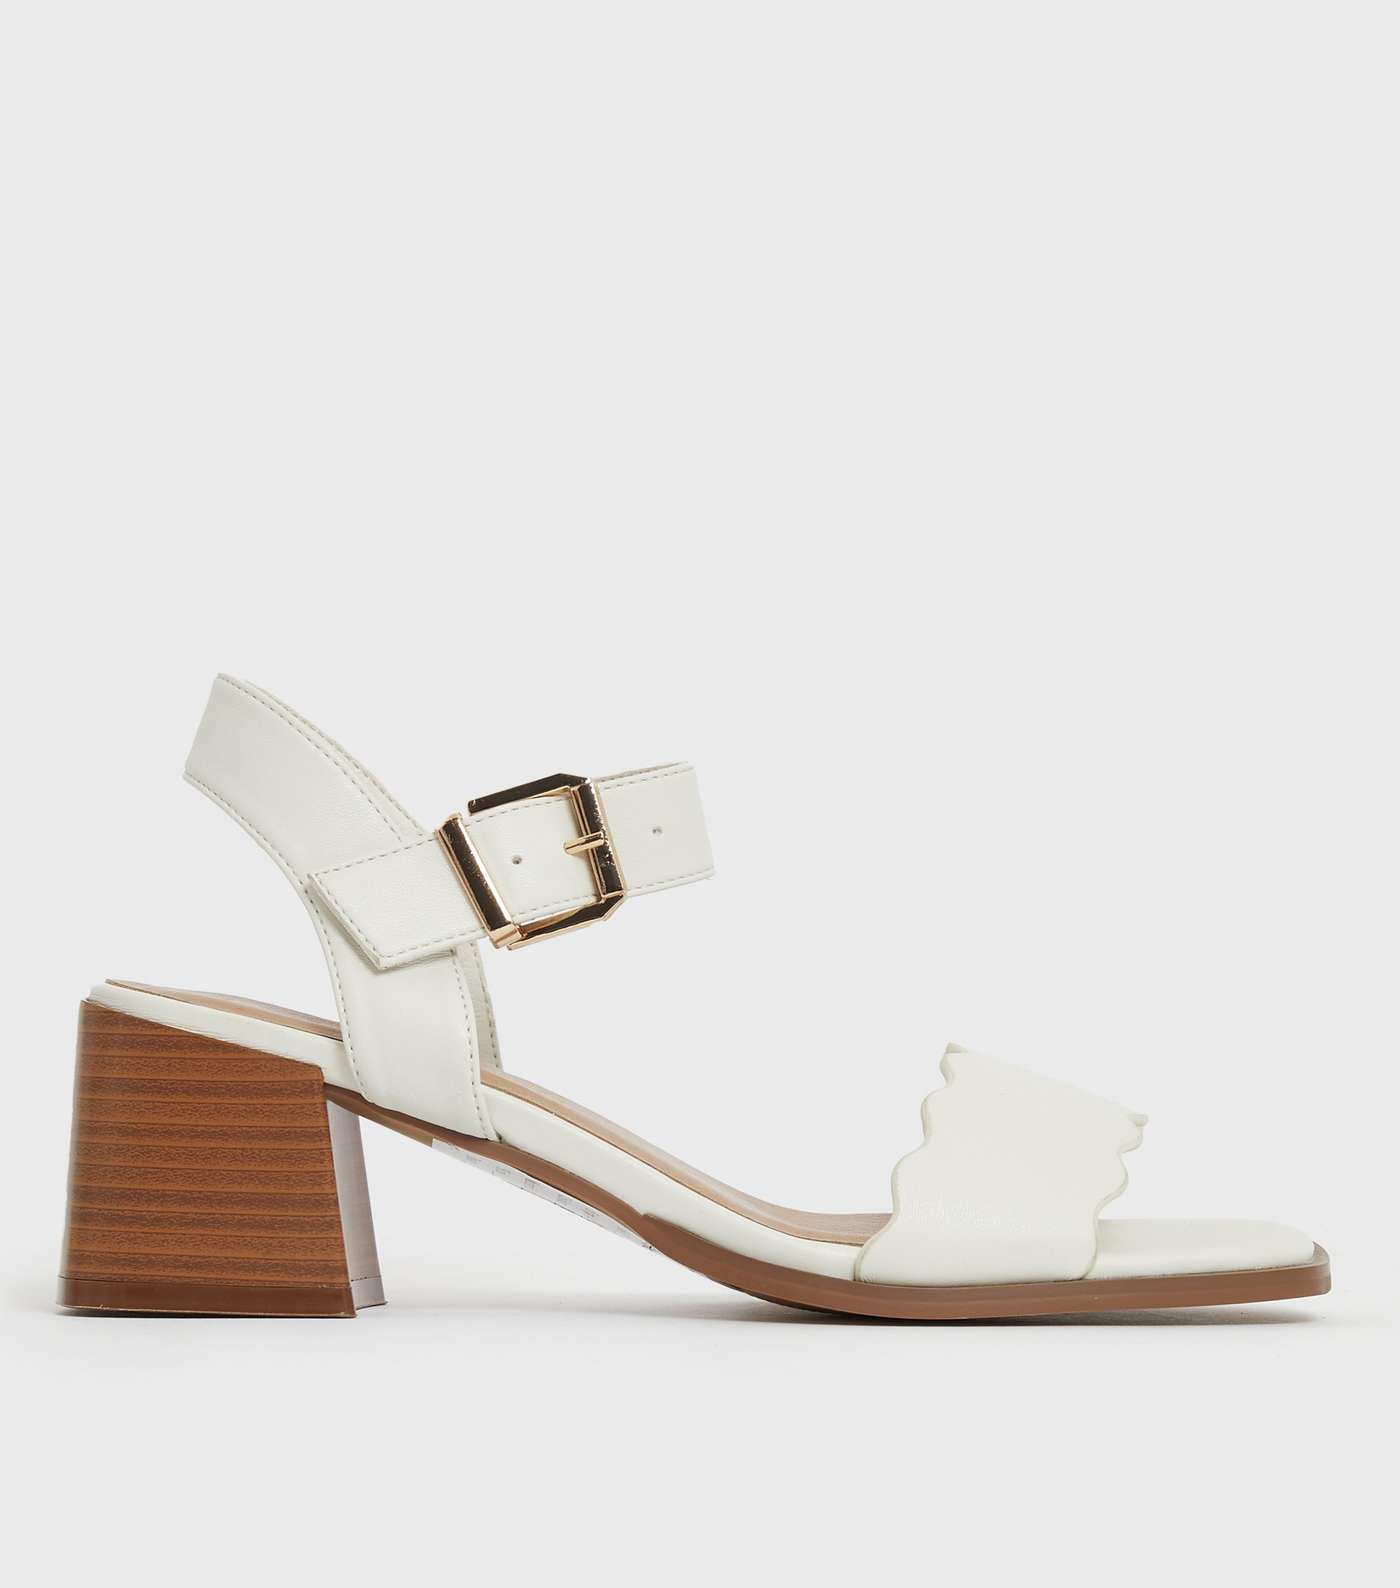 Off White Leather-Look Scalloped 2 Part Block Heel Sandals